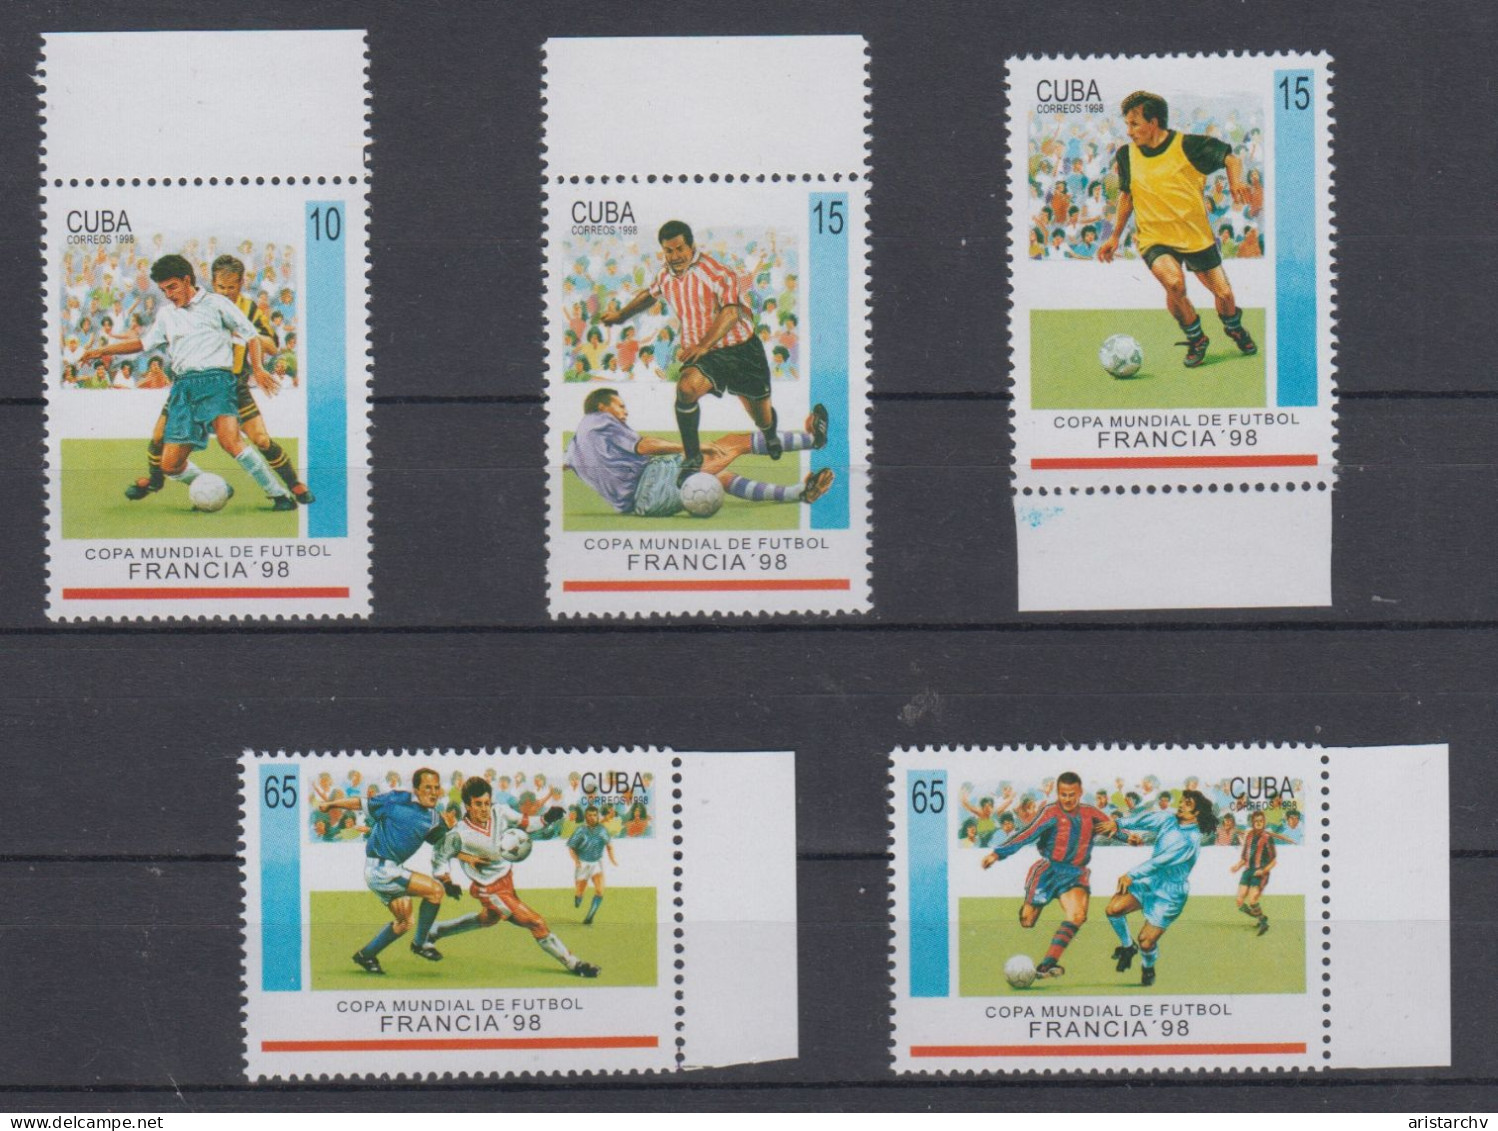 CUBA 1998 FOOTBALL WORLD CUP S/SHEET AND 5 STAMPS - 1998 – Frankreich